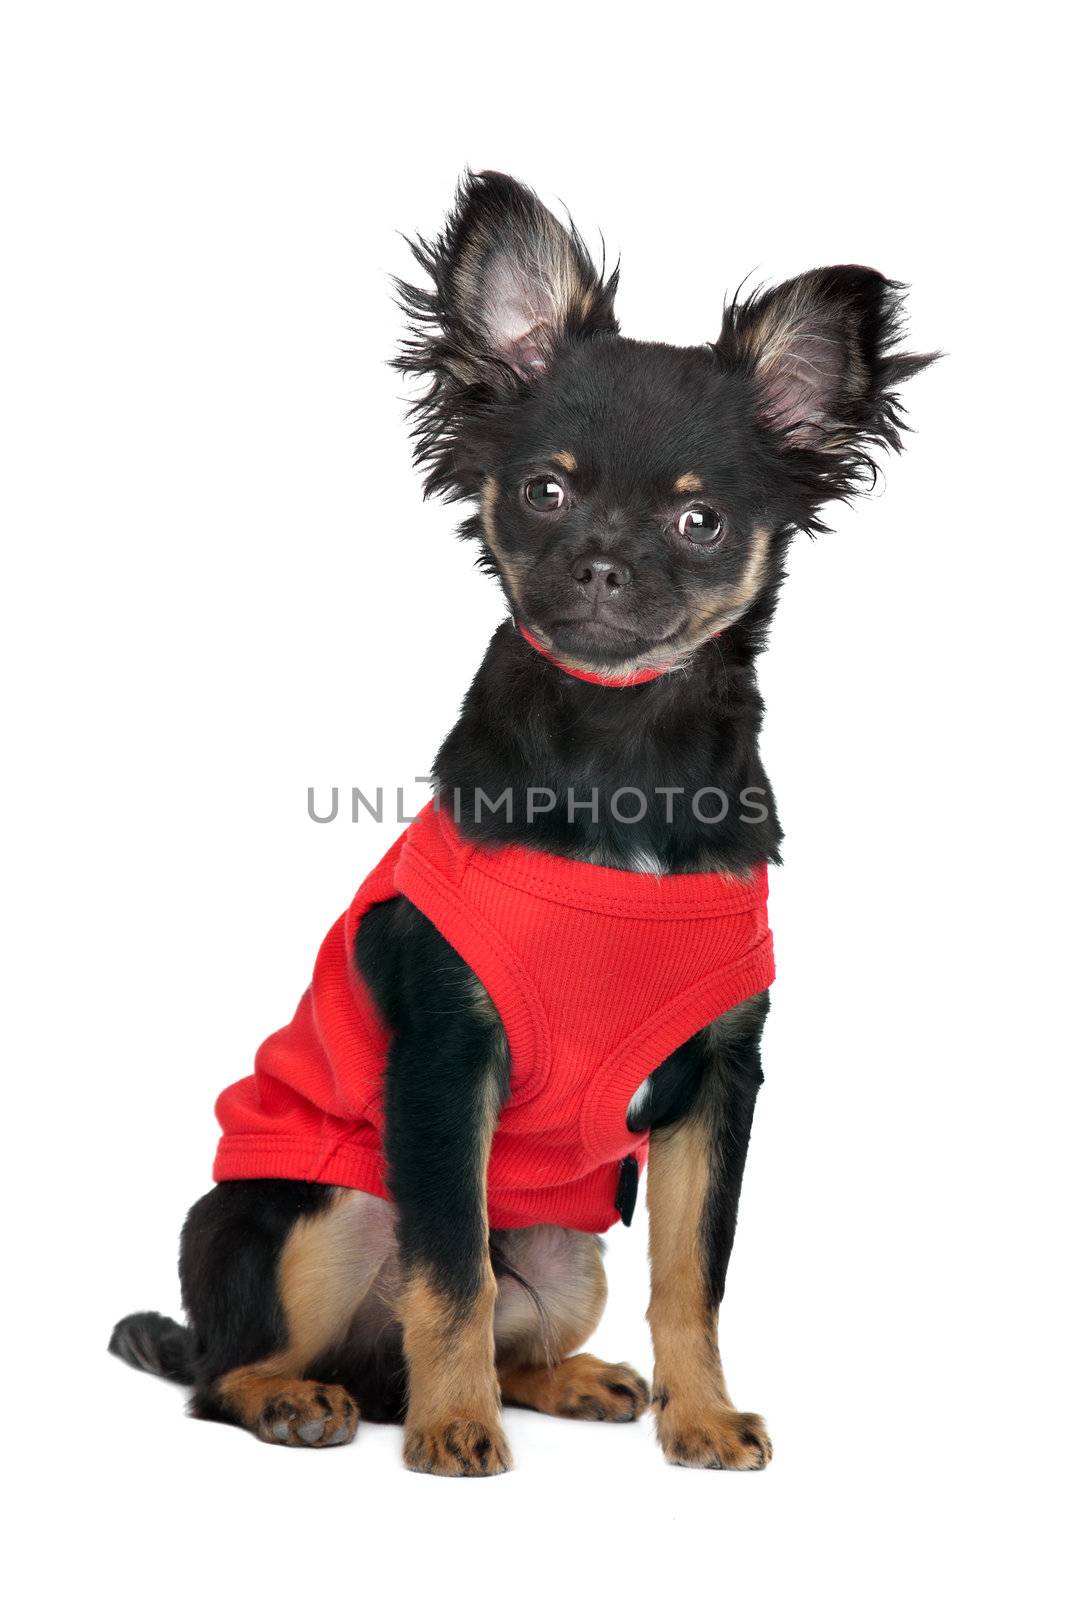 chihuahua with red shirt in front of a white background